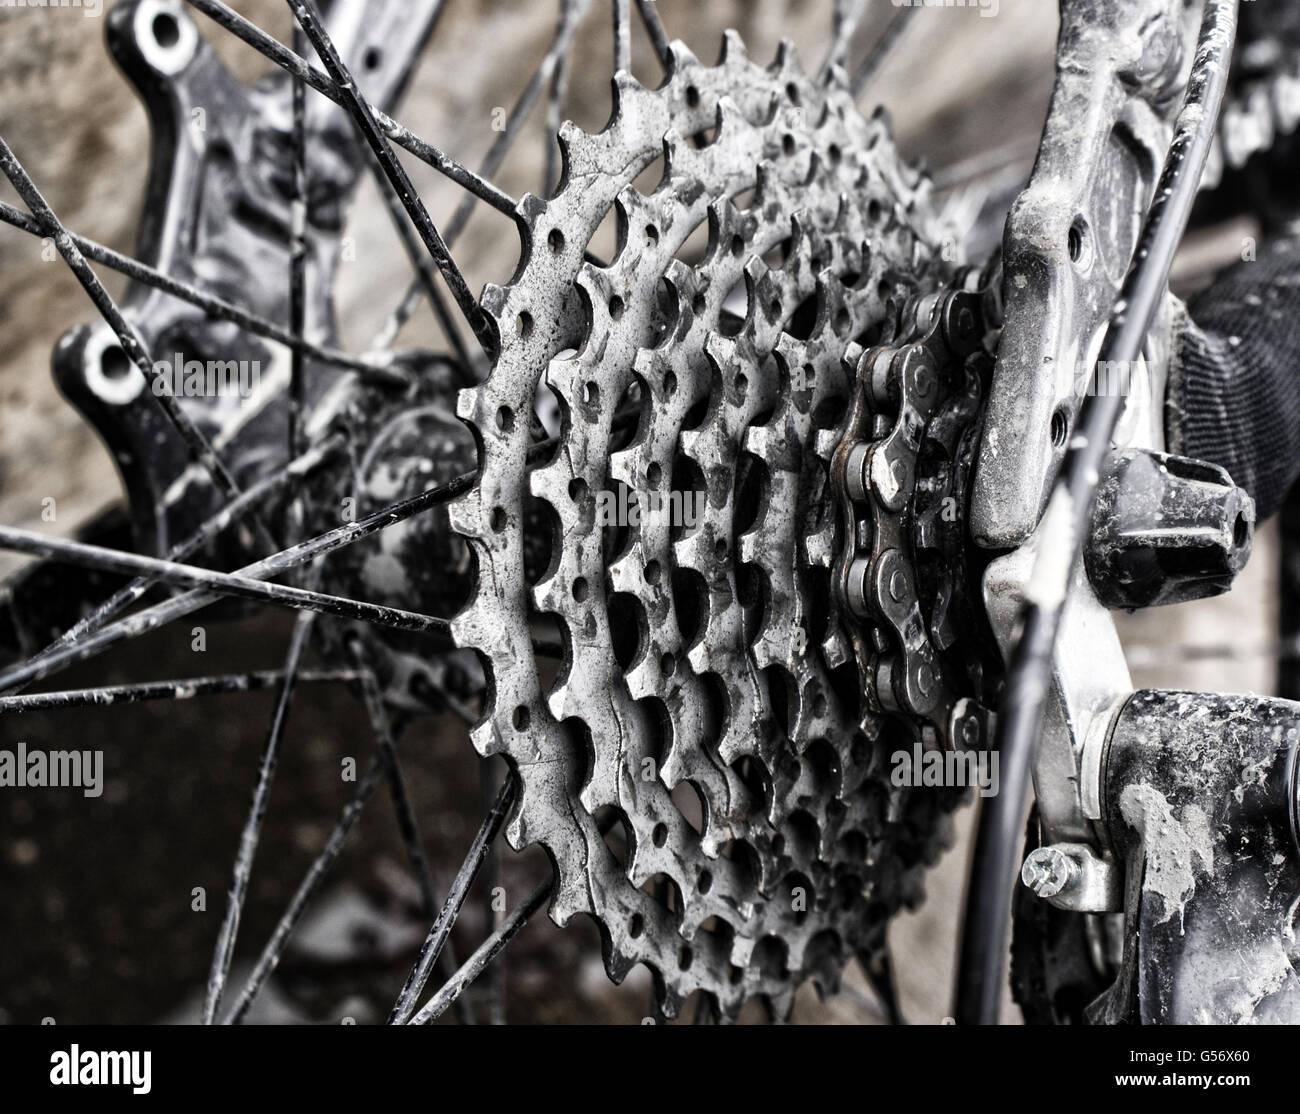 Photograph of some bicycle metal stars and gears Stock Photo